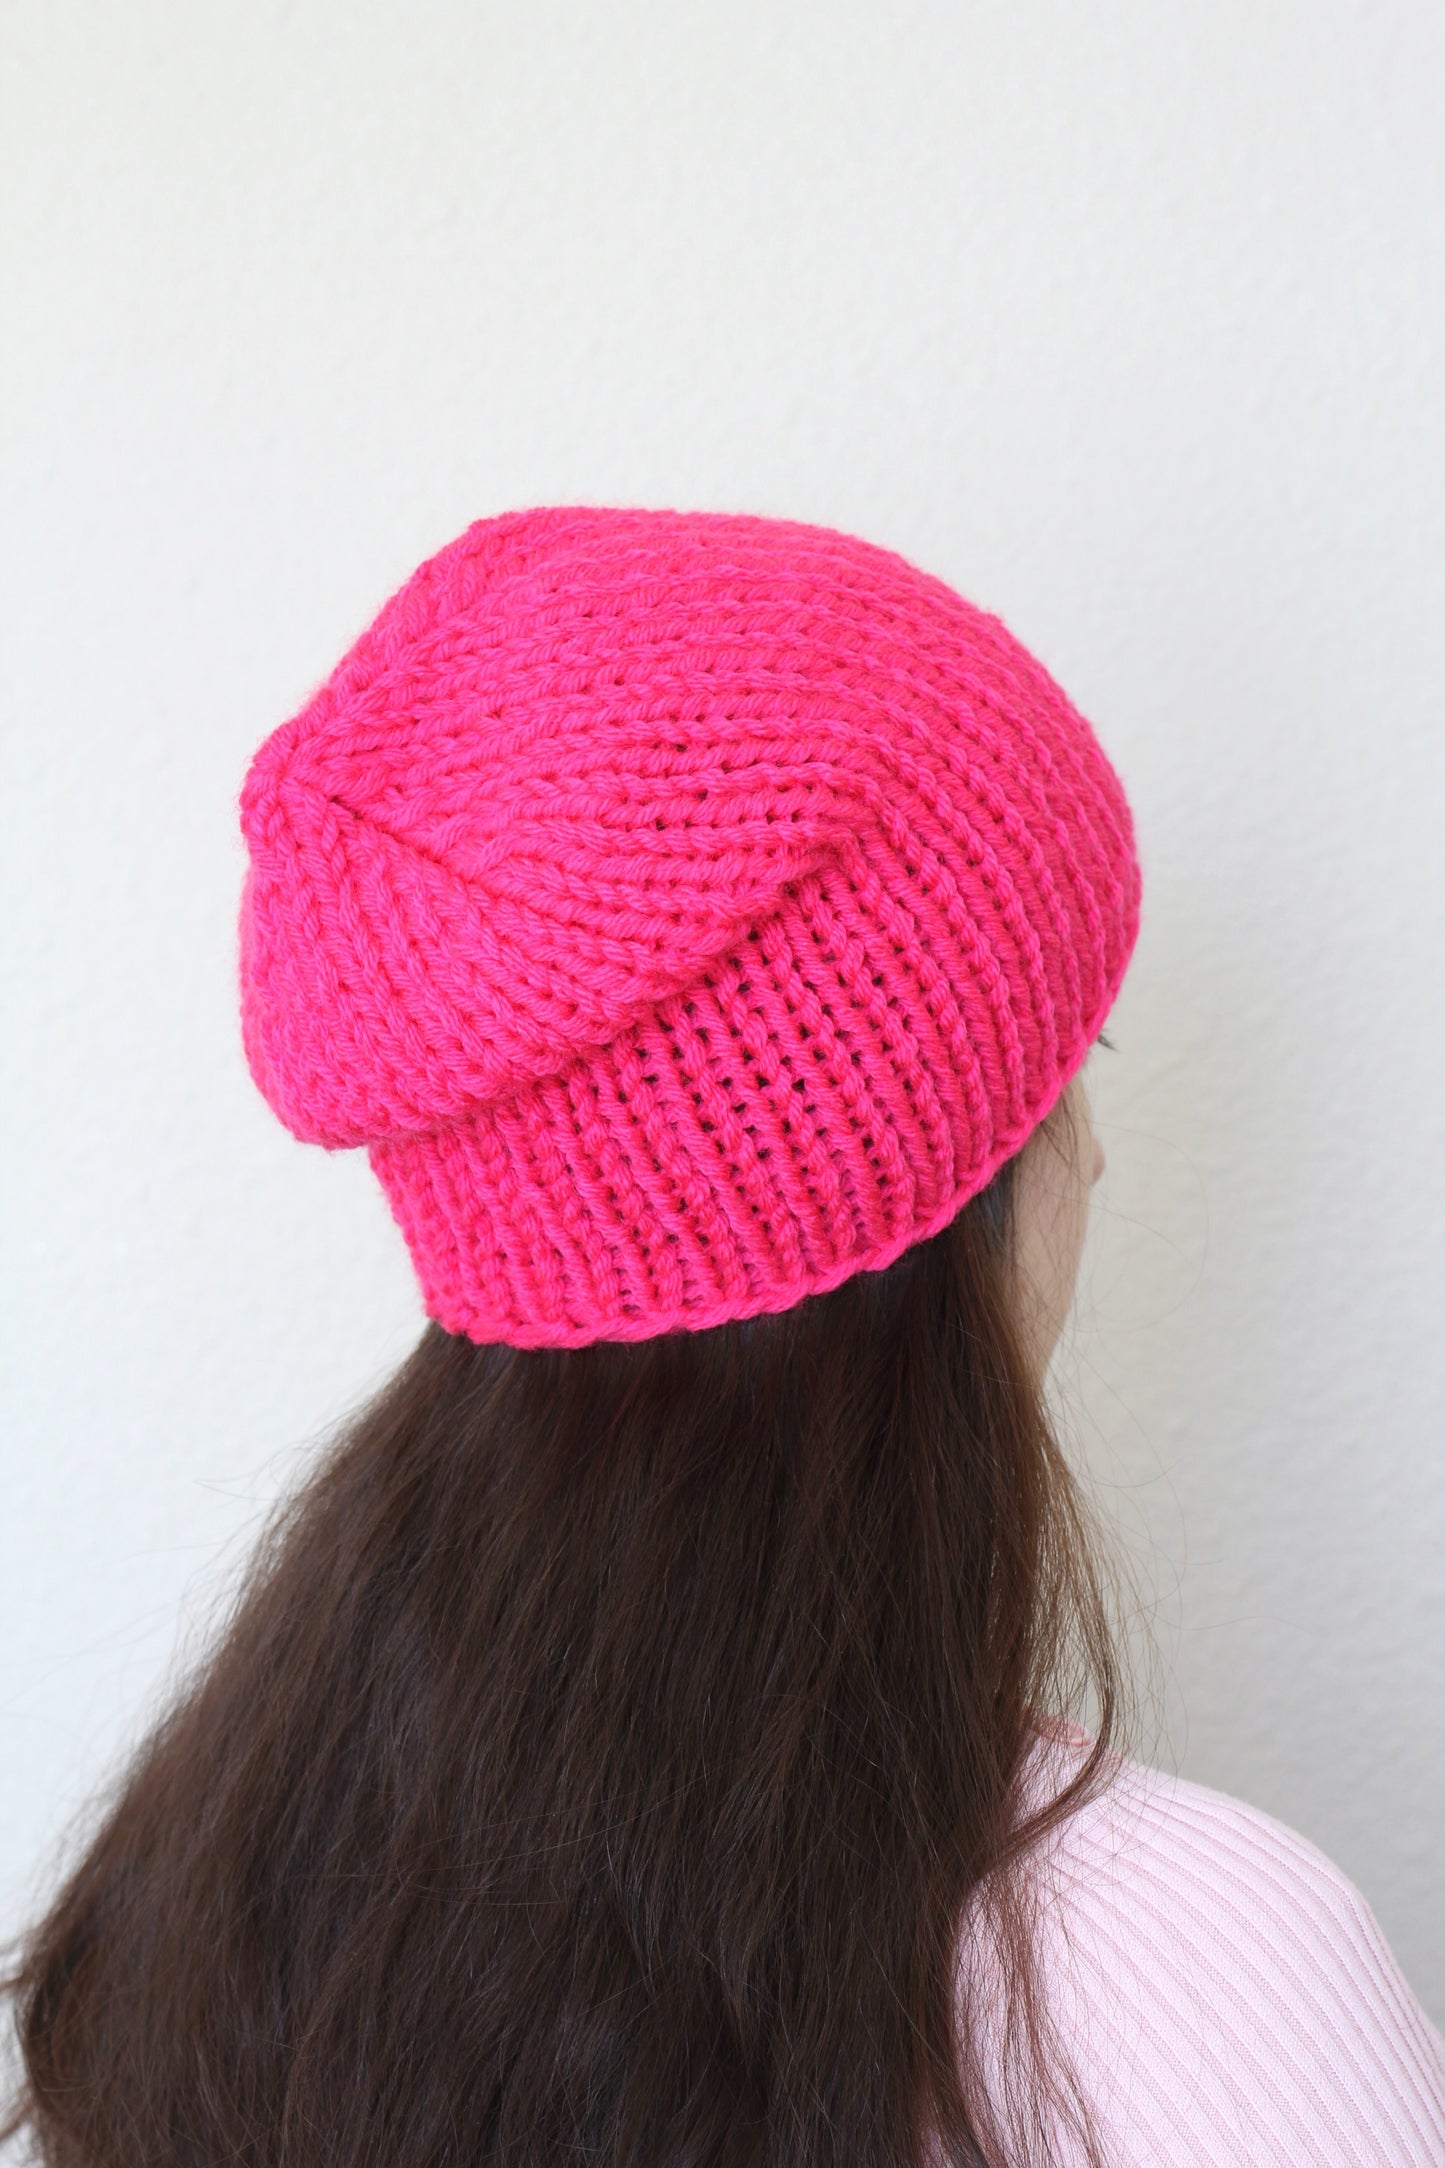 Beanie hat, knit hat, slouchy hat, knit beanie in mustard yellow color